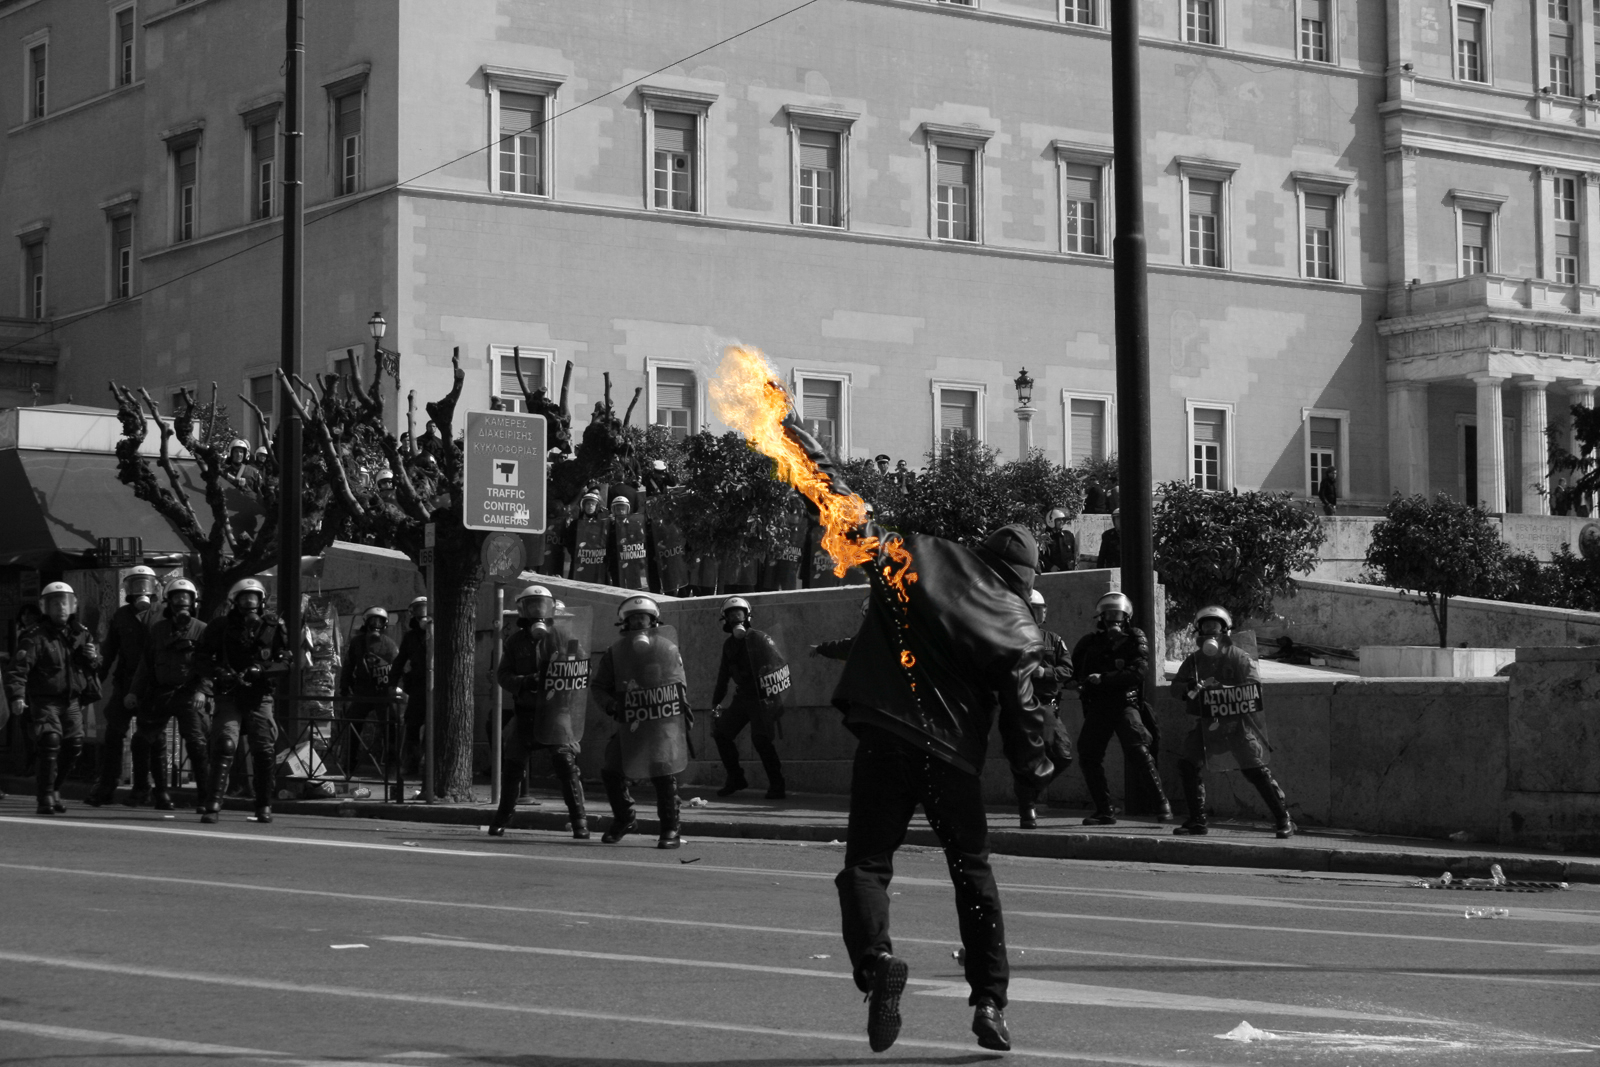 anarchy wallpaper,public event,event,stunt performer,street,black and white